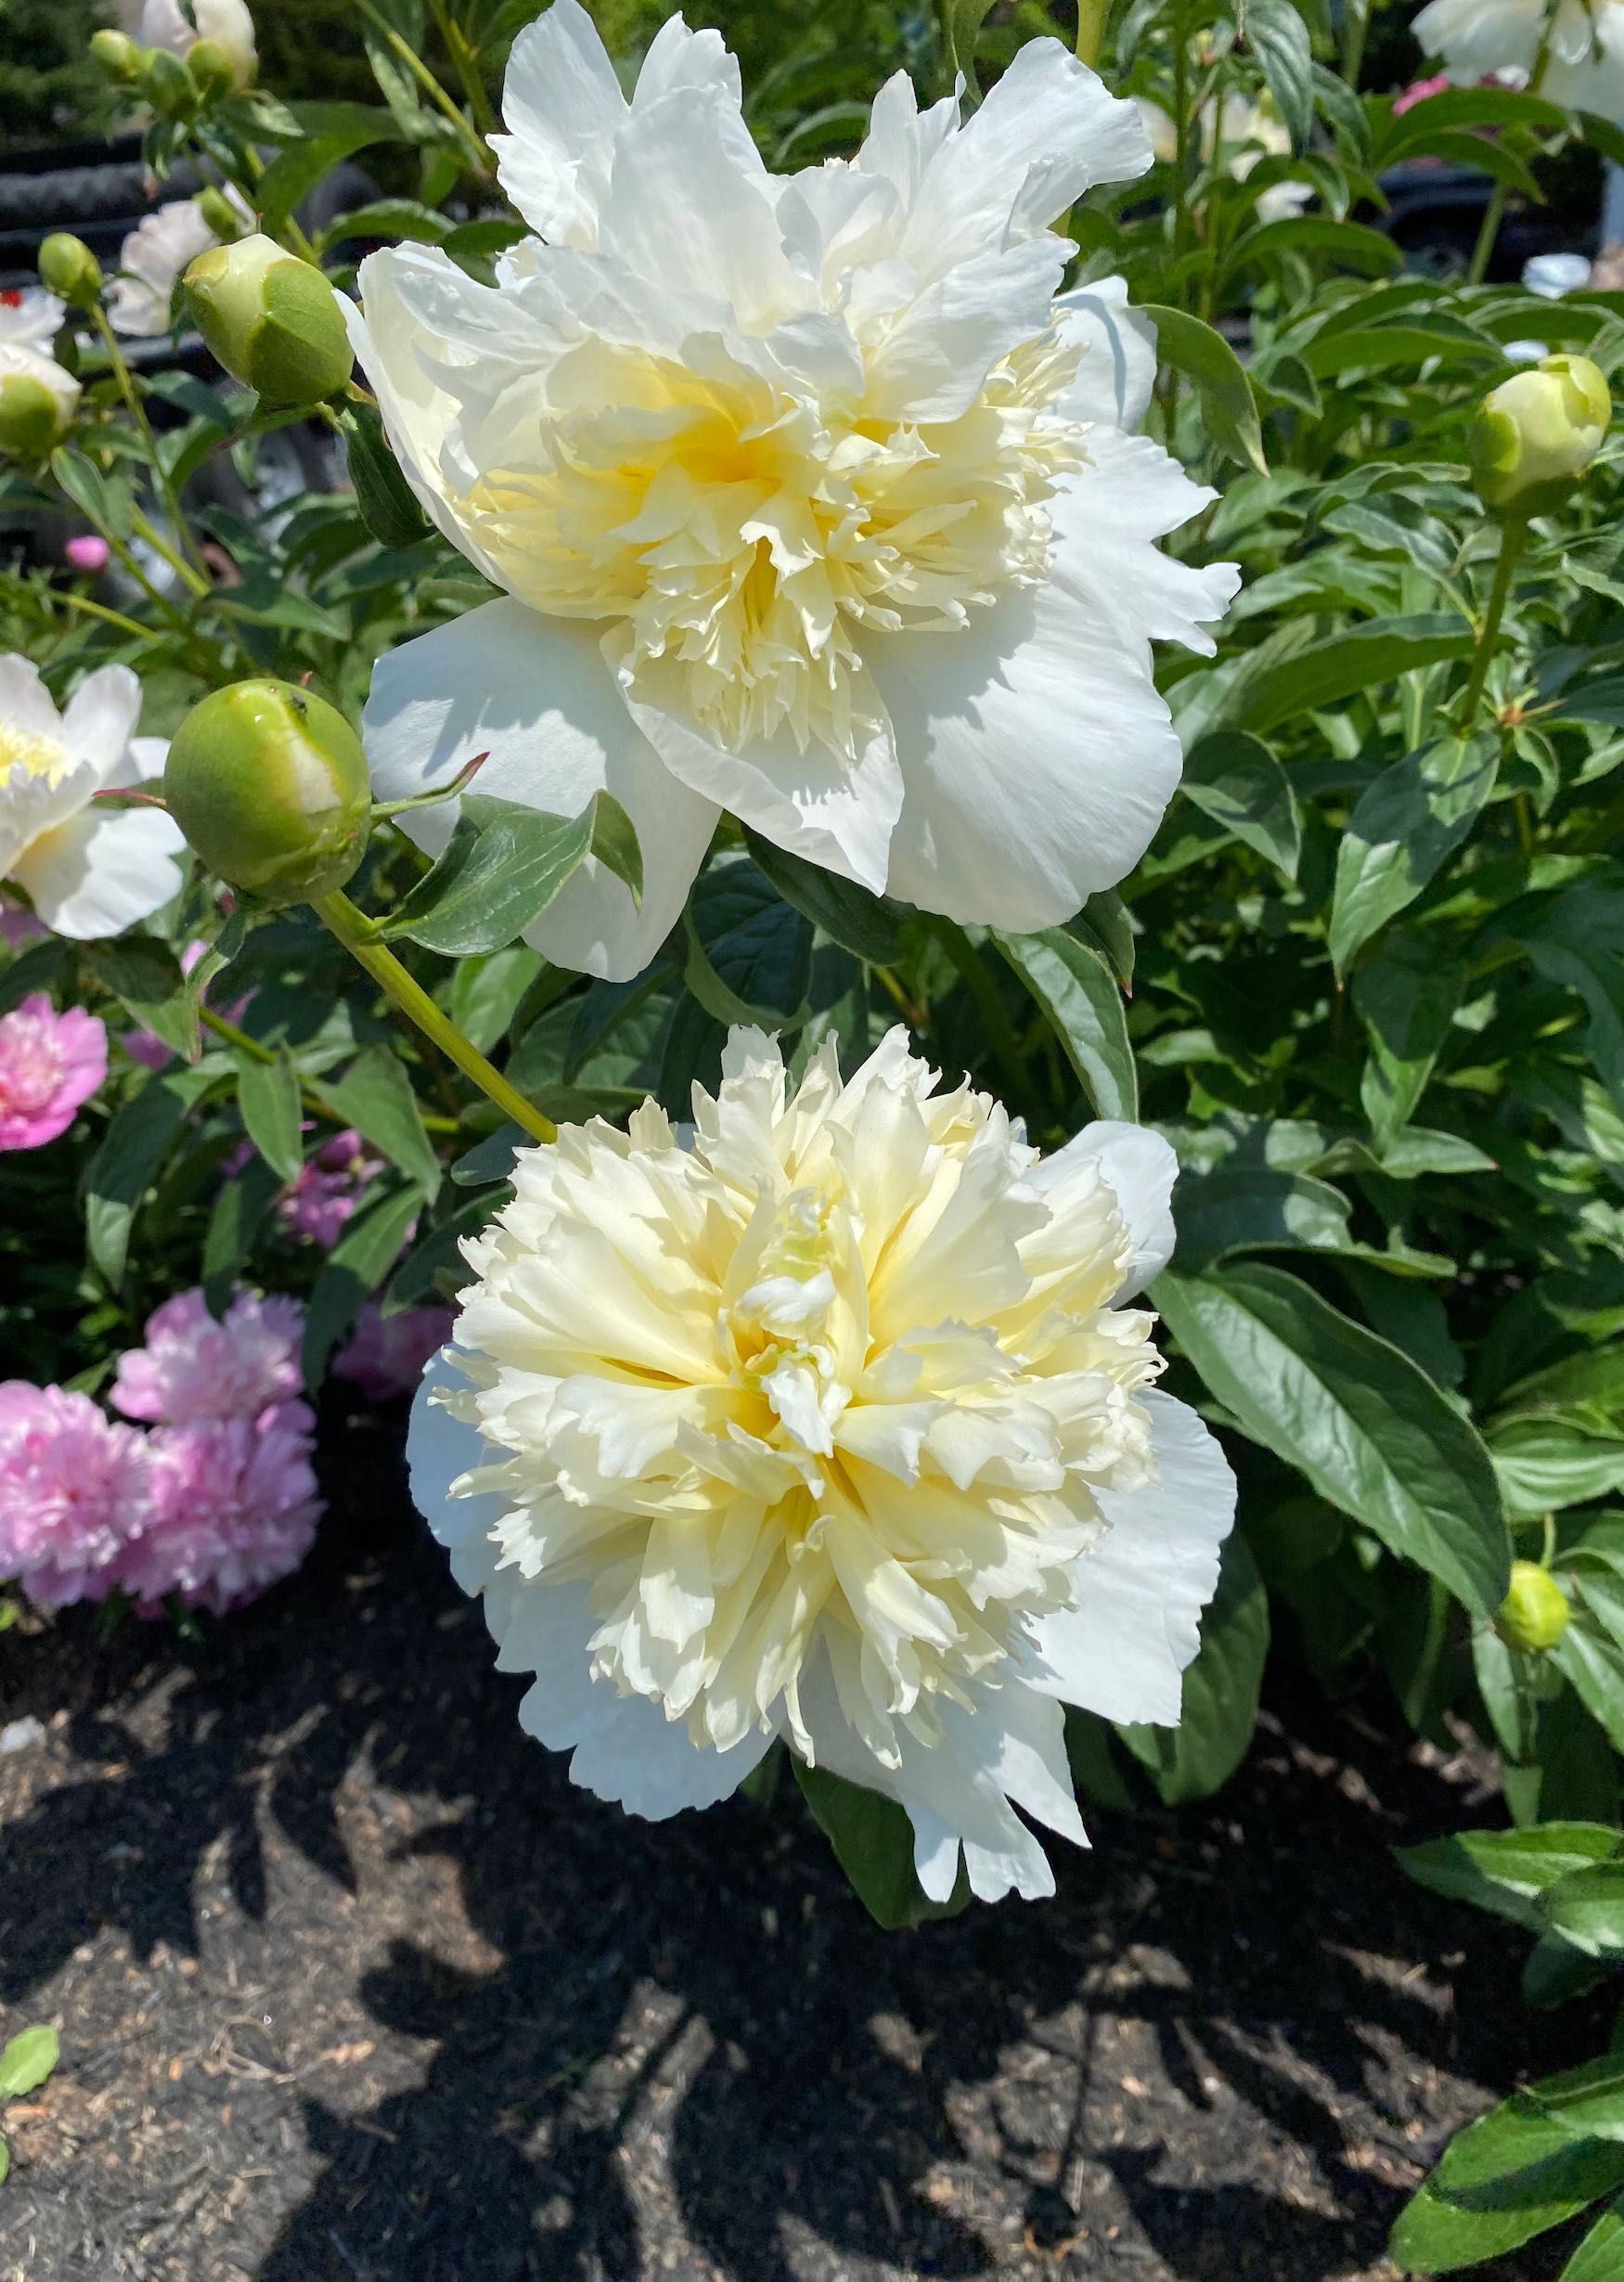 White and Cream Colored Peonies